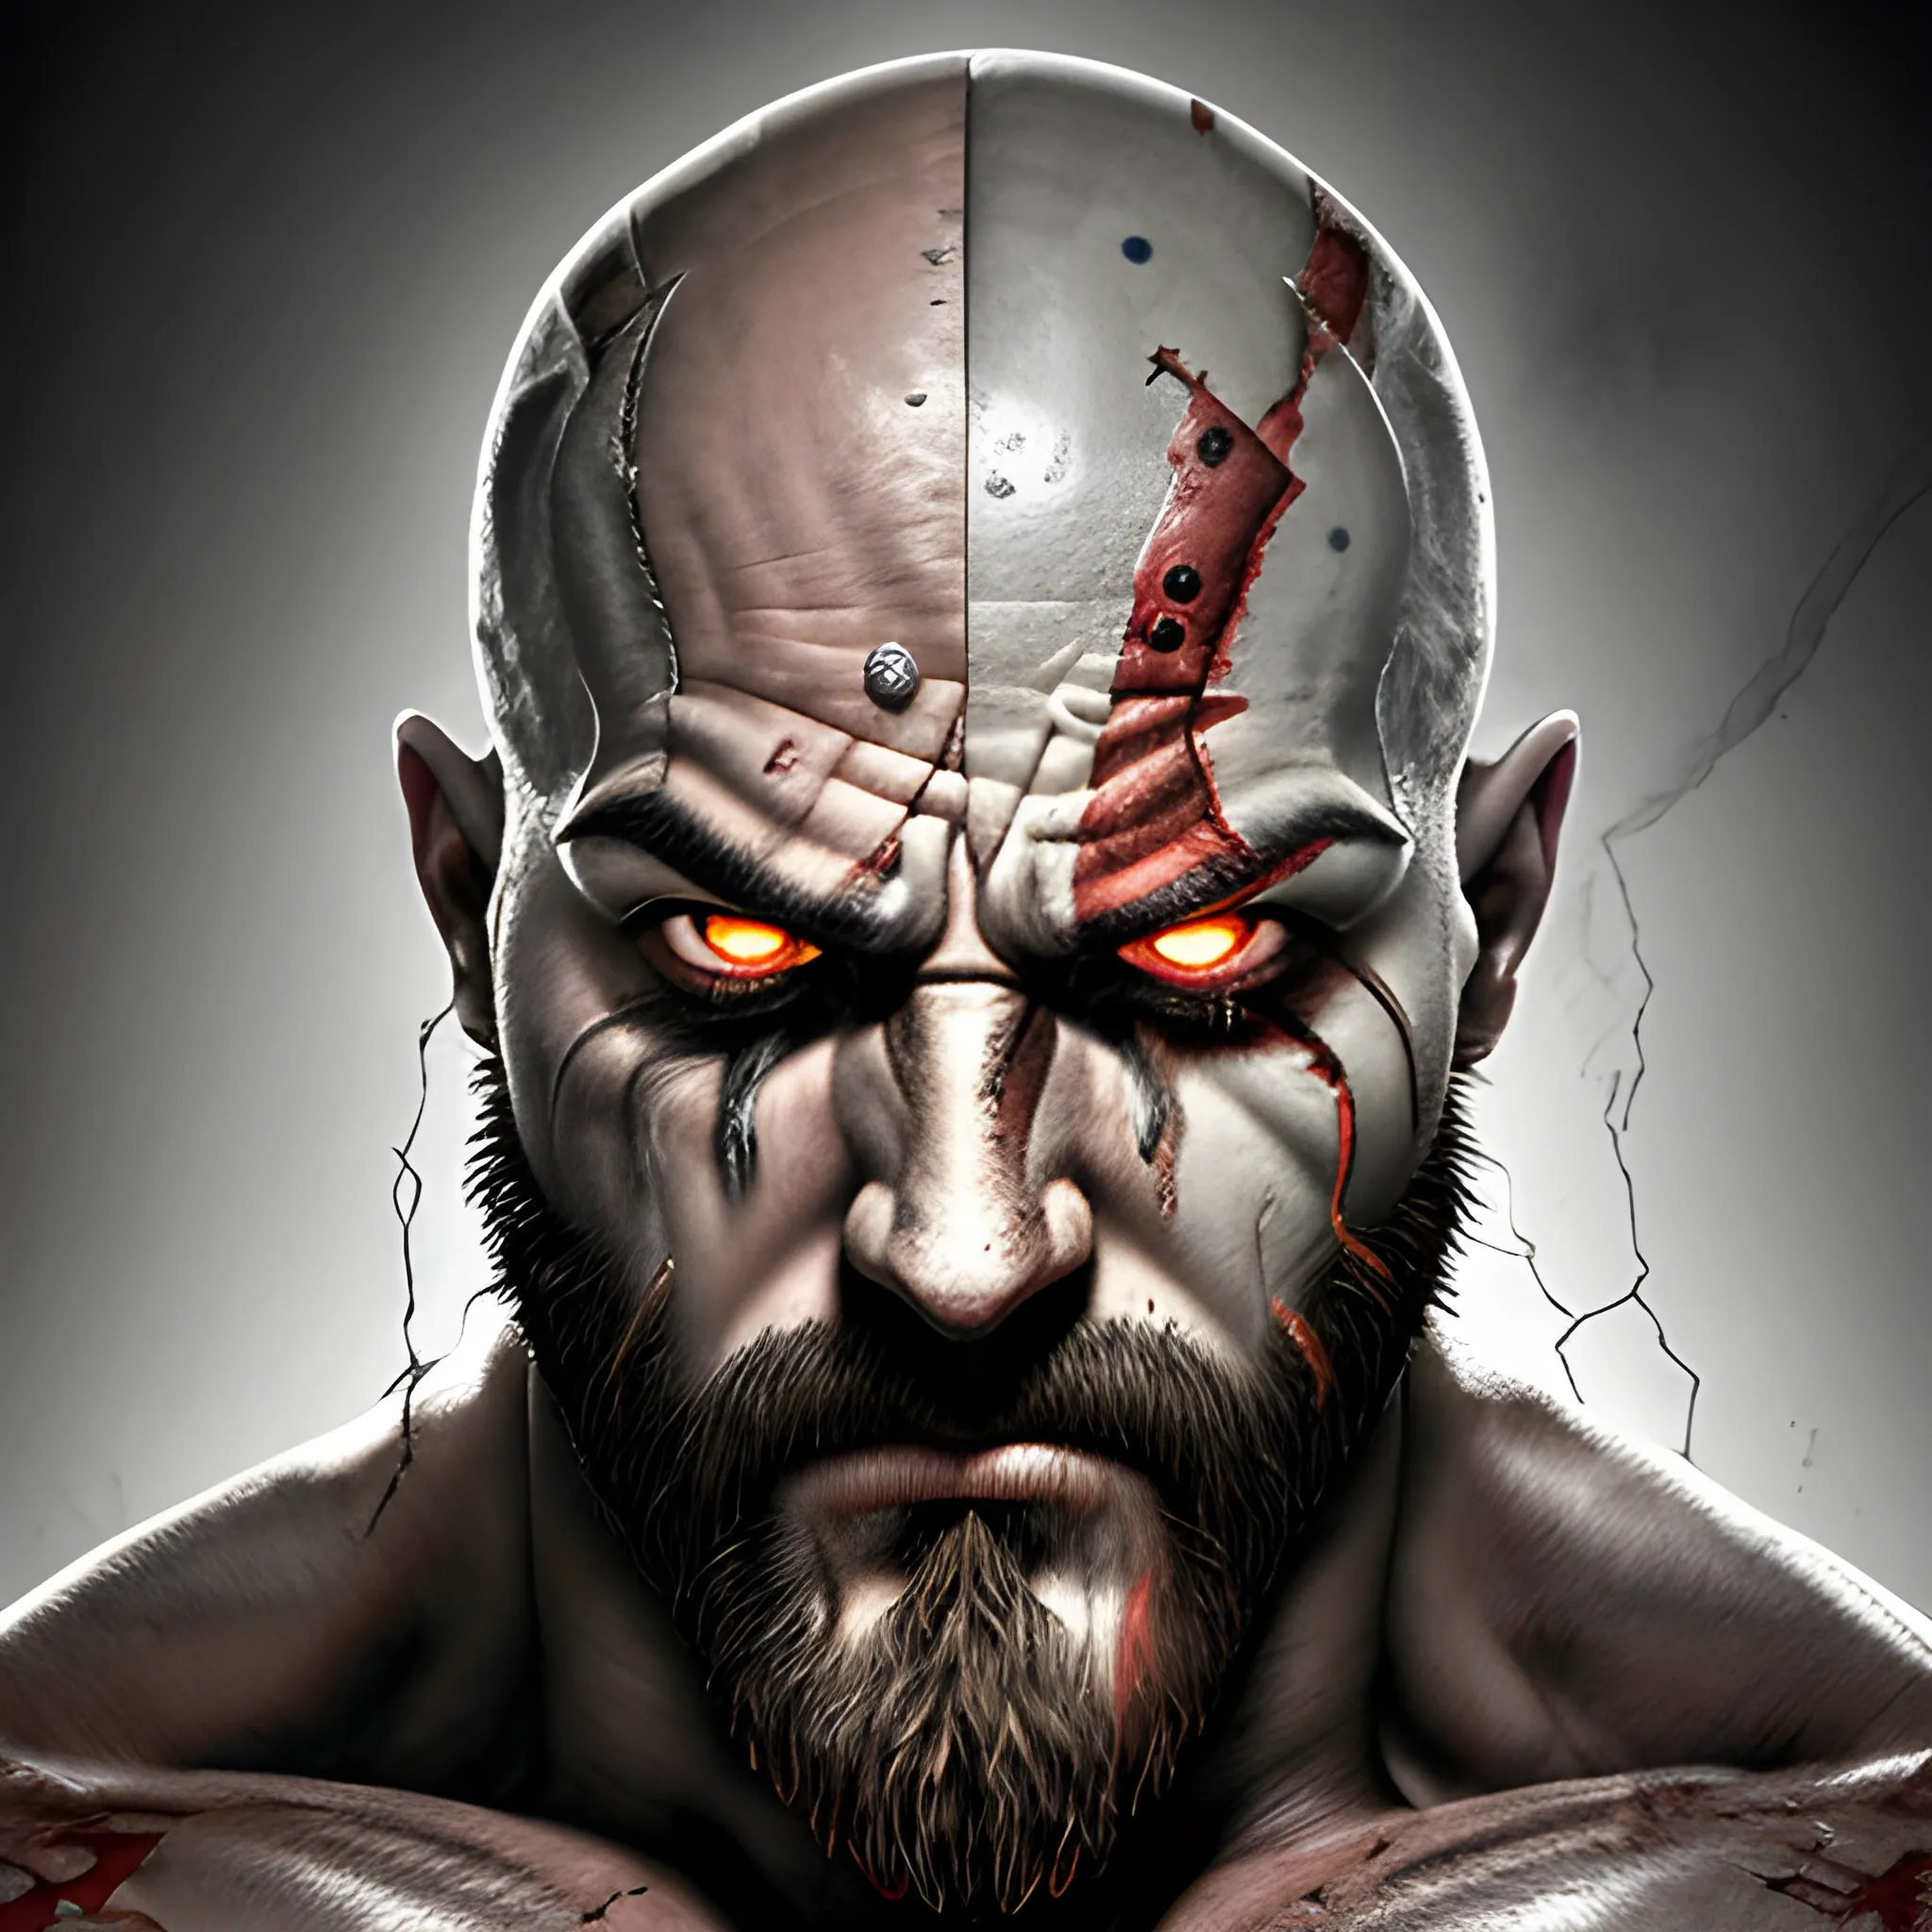 In this intense close-up, Kratos, the Spartan warrior, bears the unmistakable marks of unbridled anger. His battle-hardened face is etched with scars and a furrowed brow that cast a formidable shadow over his piercing, wrathful eyes. Veins pulse beneath his skin as his clenched jaw reveals the resolve within. Sweat and dirt streak his weathered skin, mirroring the toll of countless battles. The fiery backdrop mirrors the tumultuous storm within him. Kratos' visage, a portrait of rage, resonates with the relentless pursuit of vengeance, creating a gripping image of primal fury., Trippy, Pencil Sketch, Trippy